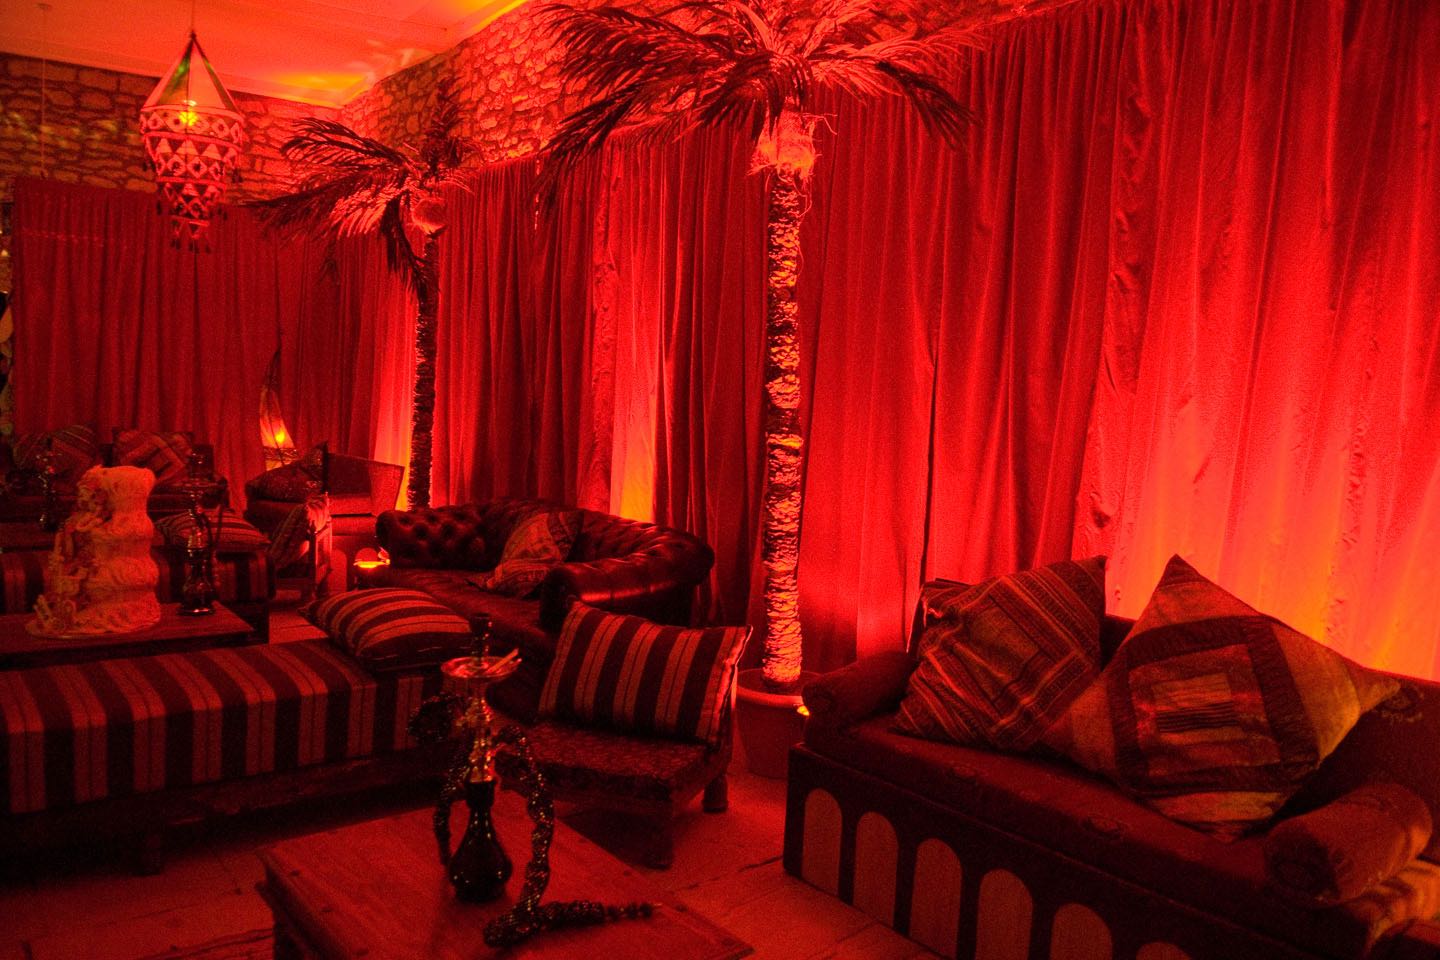 Image of a Moroccan themed party